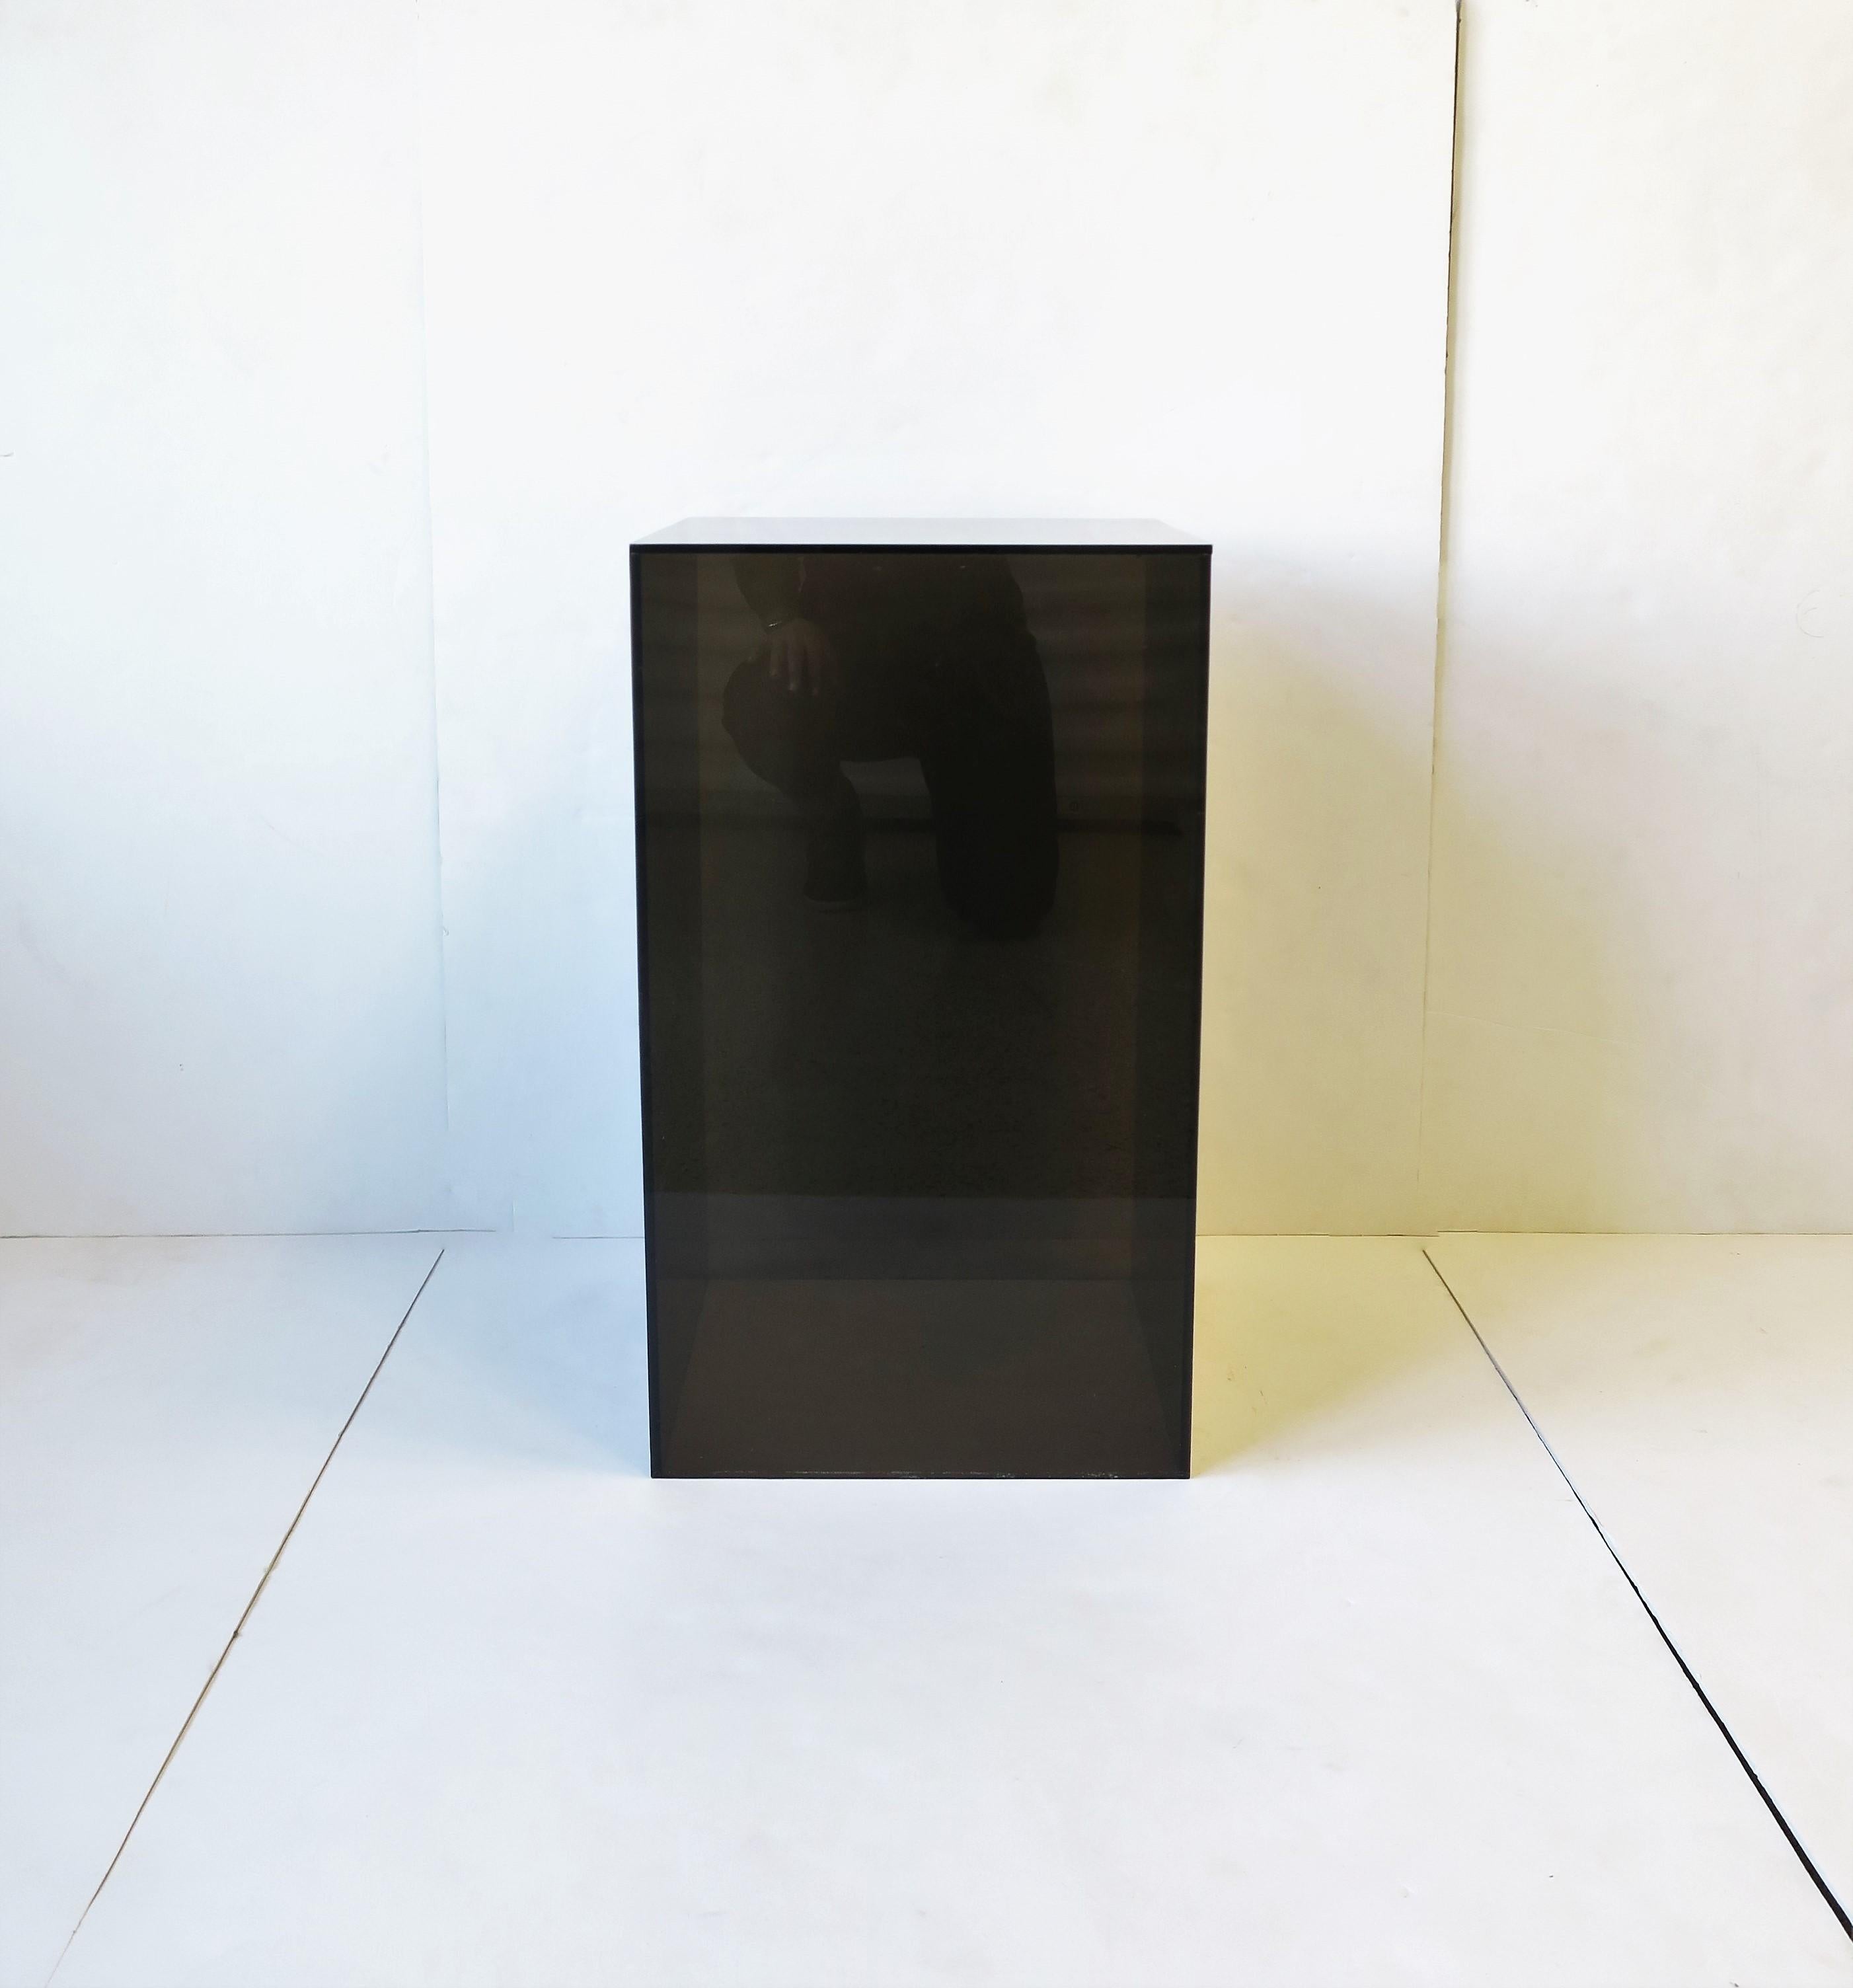 A modern or Postmodern period black acrylic pedestal column stand display piece or end table, circa late 20th century. Great for items such as art, sculpture, jewelry display, plant, and more. Or as and end table as demonstrated with books and table